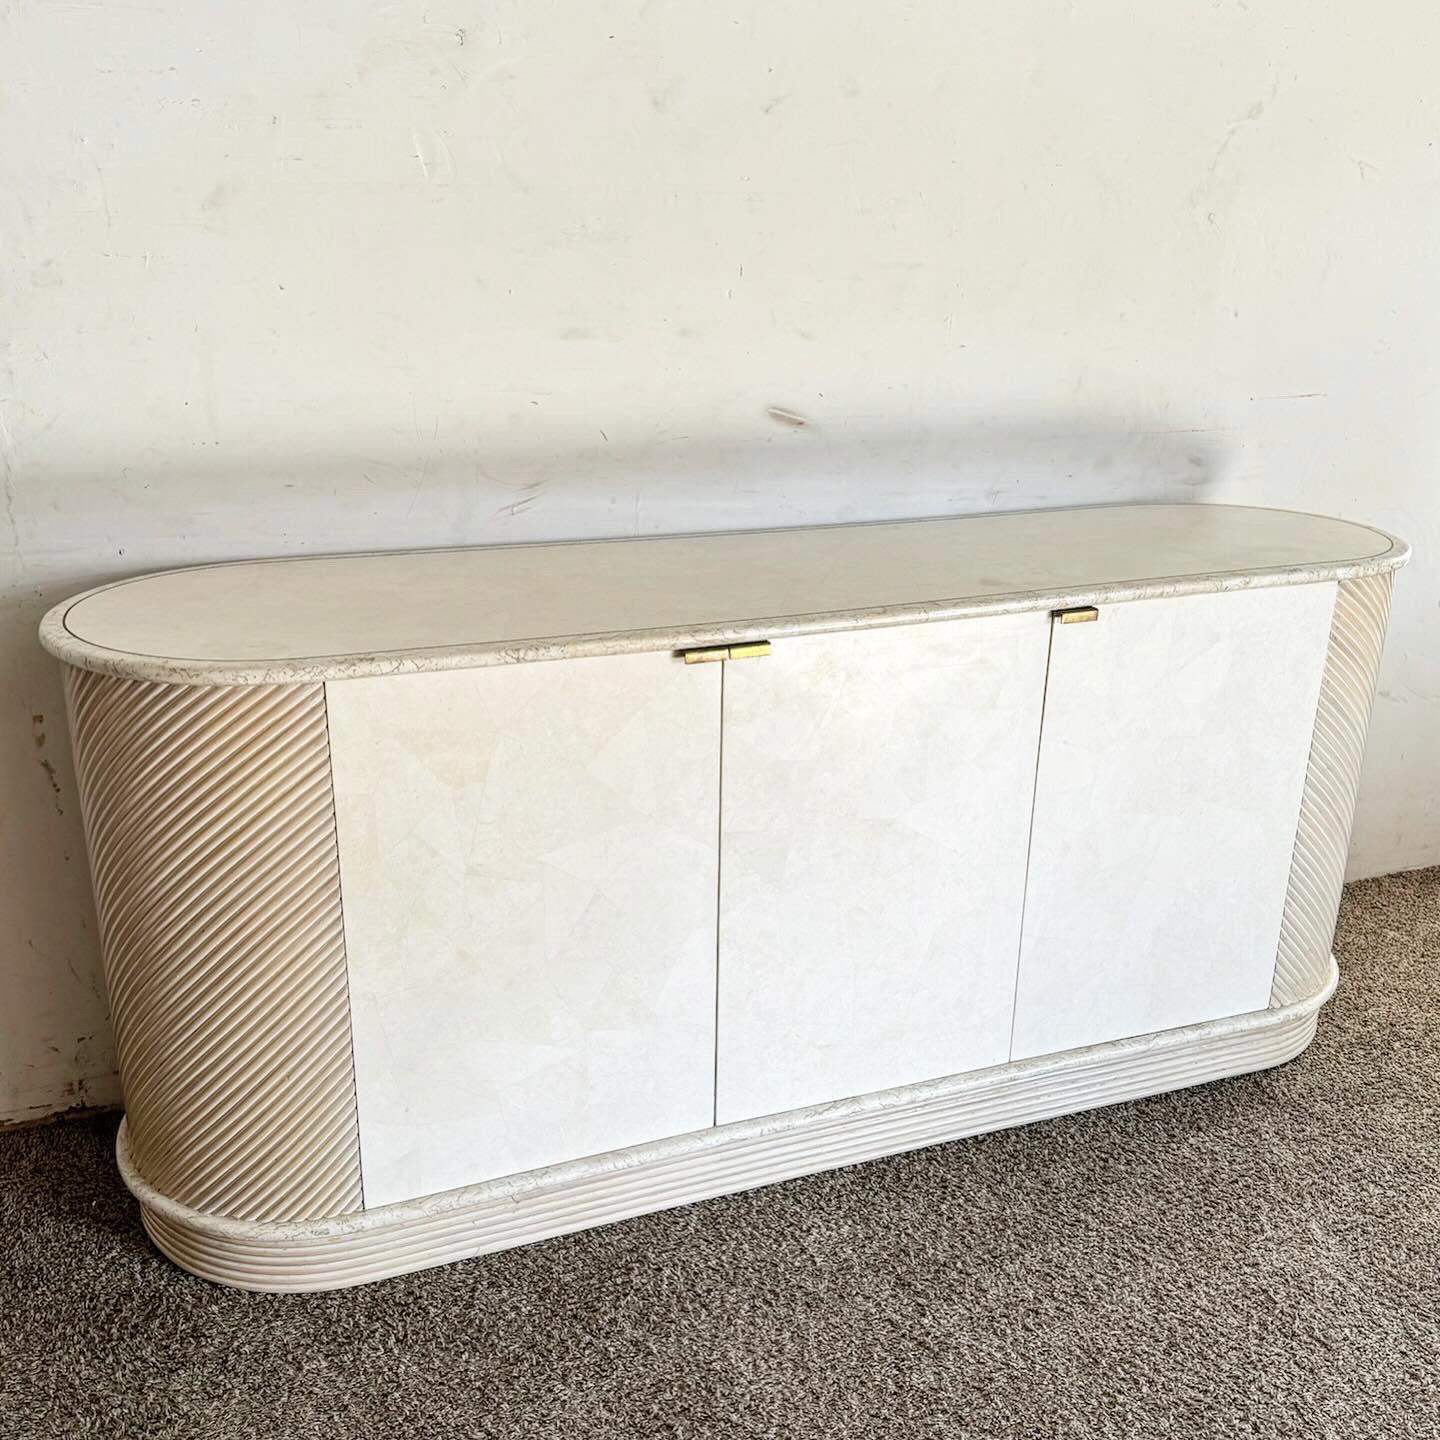 The Postmodern Chic Pencil Reed and Stone Credenza merges natural elegance with contemporary design. It features a unique blend of textured pencil reed and sophisticated stone, creating a striking furniture piece. Its modern silhouette and clean